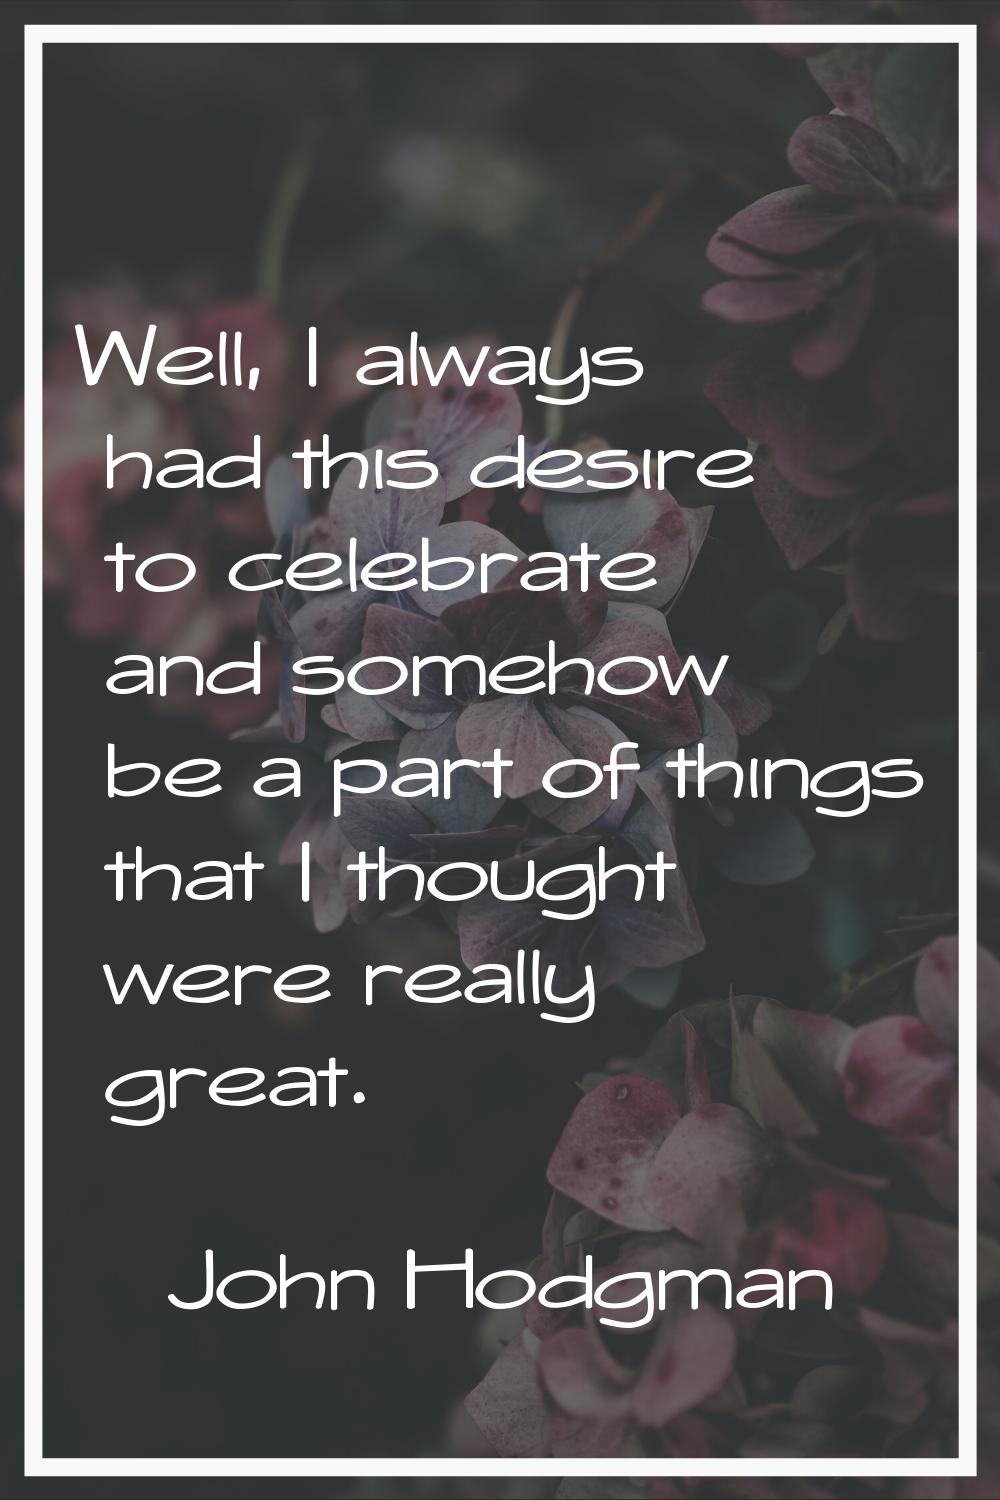 Well, I always had this desire to celebrate and somehow be a part of things that I thought were rea